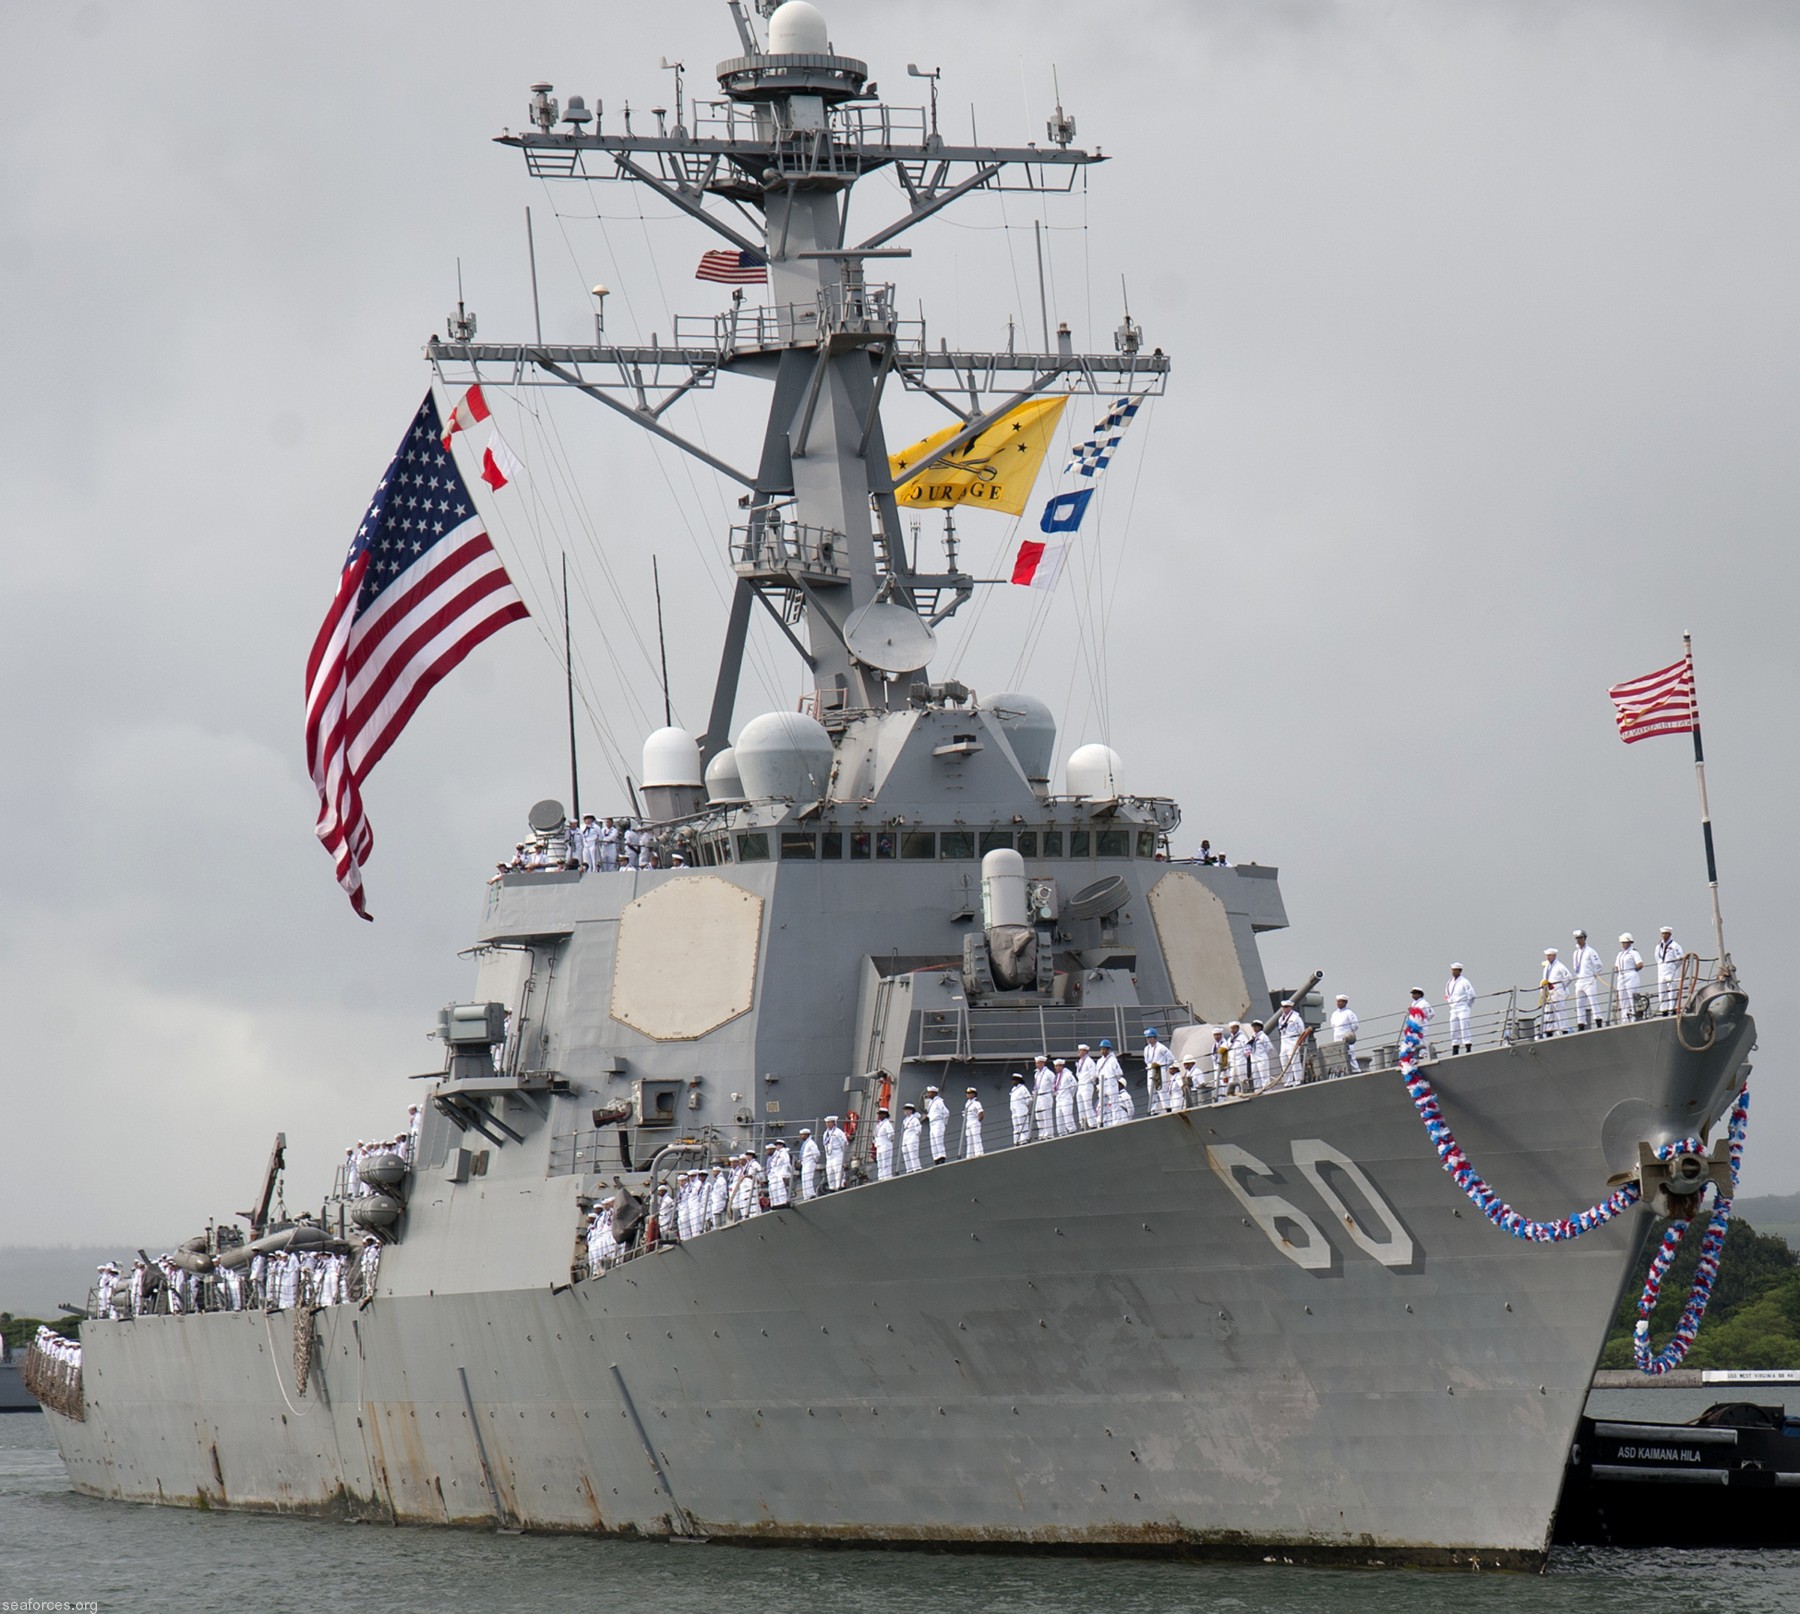 ddg-60 uss paul hamilton guided missile destroyer us navy 66